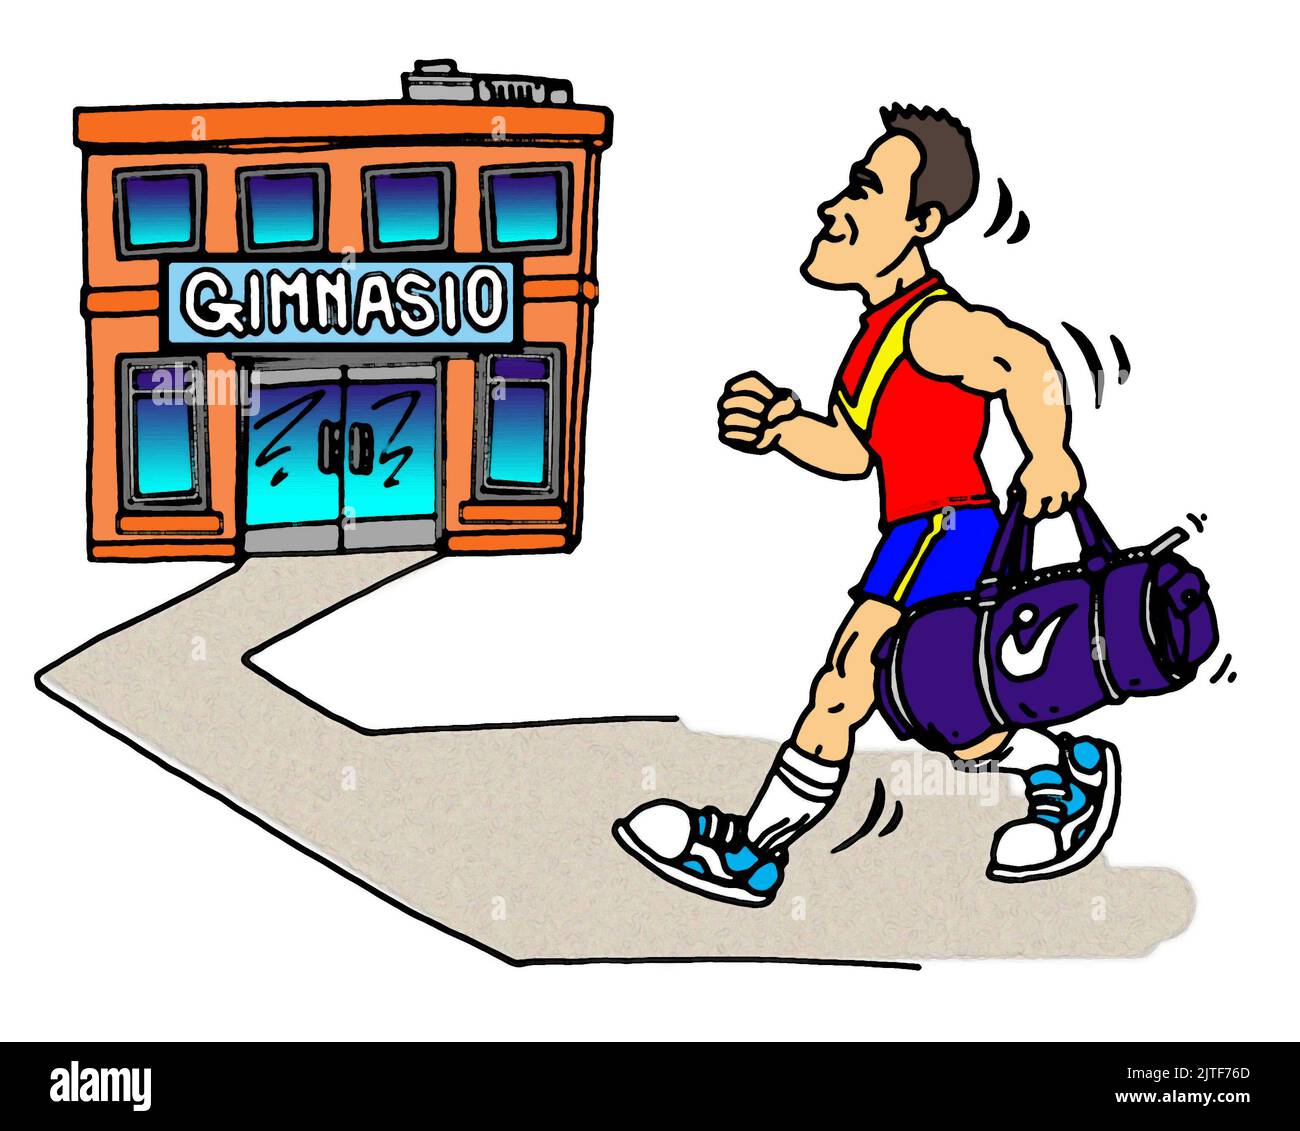 Artwork, illustration of a man dressed in athletic clothing heading towards a building labelled Gimnasio (gym) in Spanish. He is carrying a sports bag Stock Photo